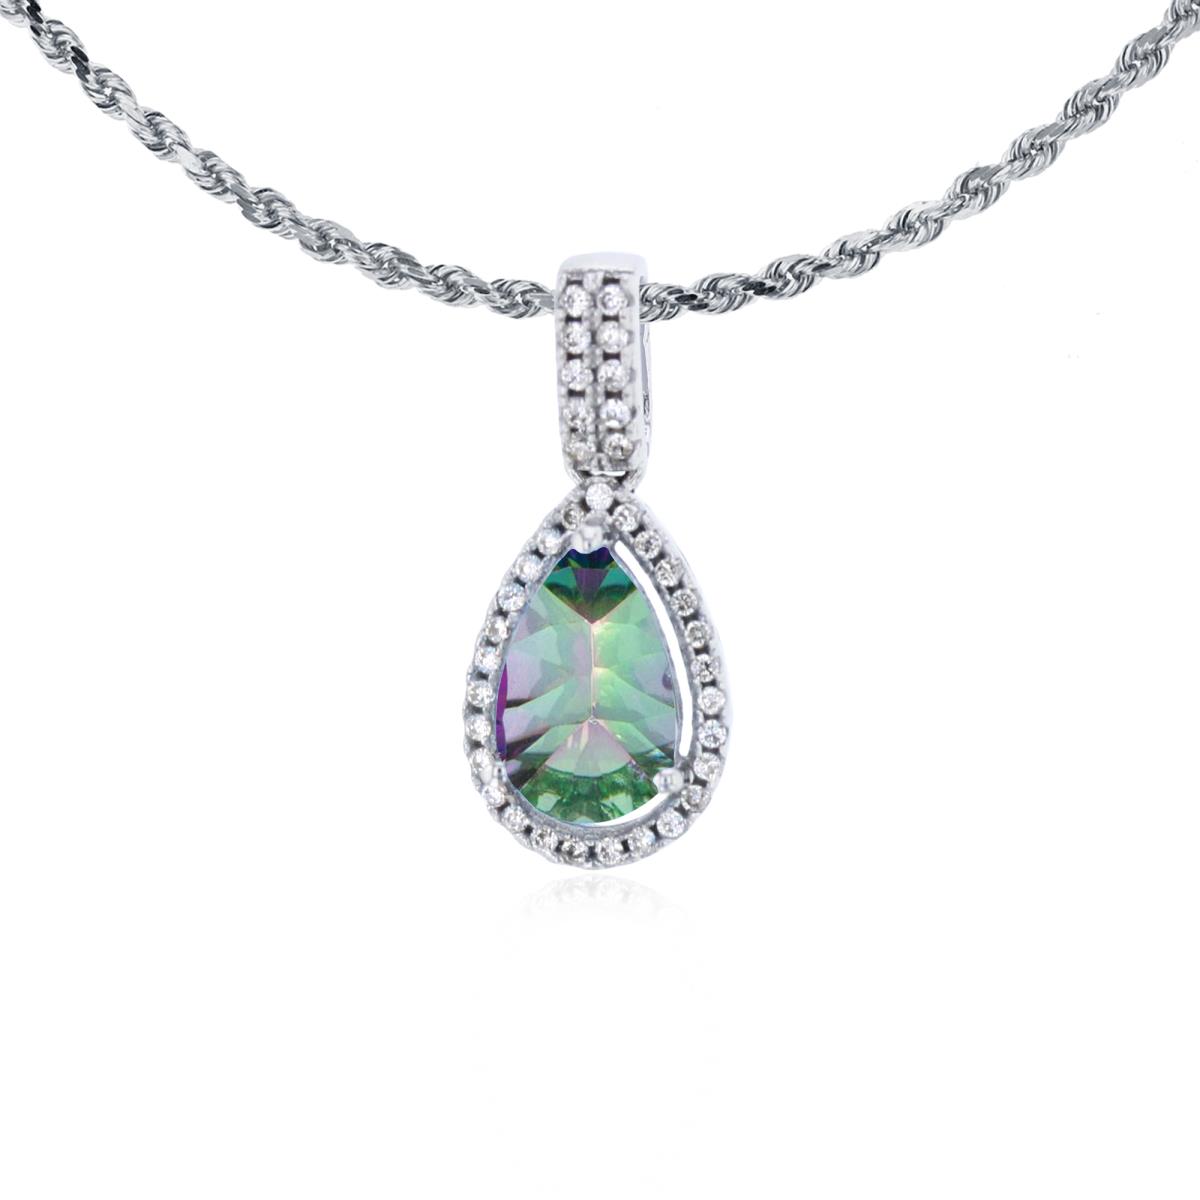 14K White Gold 8x5mm Pear Cut Mystic Green Topaz & 0.11 CTTW Diamond Halo 18" Rope Chain Necklace